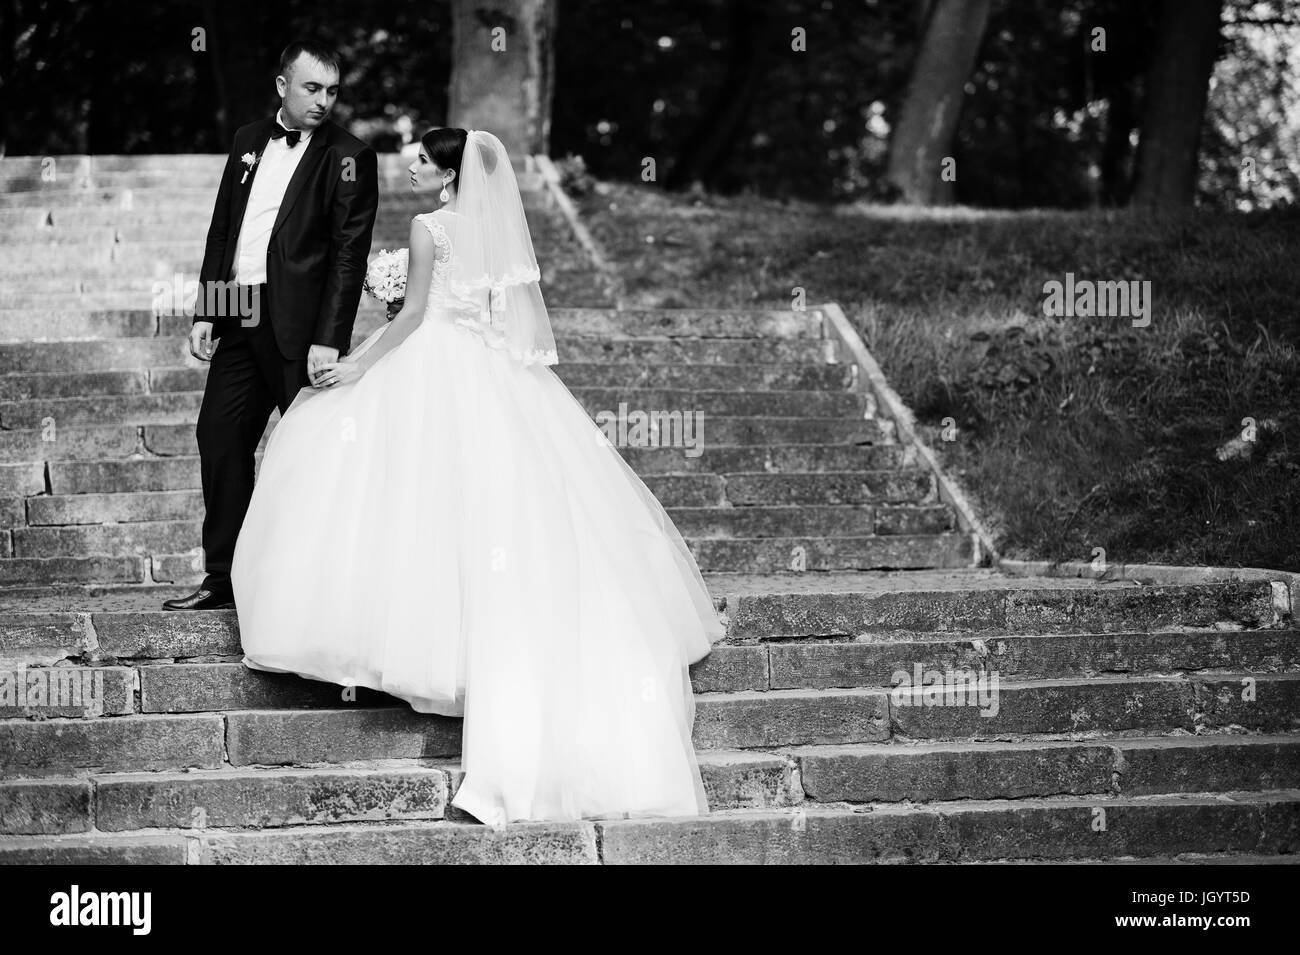 Perfect wedding couple posing on the stairs in the park. Black and white photo. Stock Photo